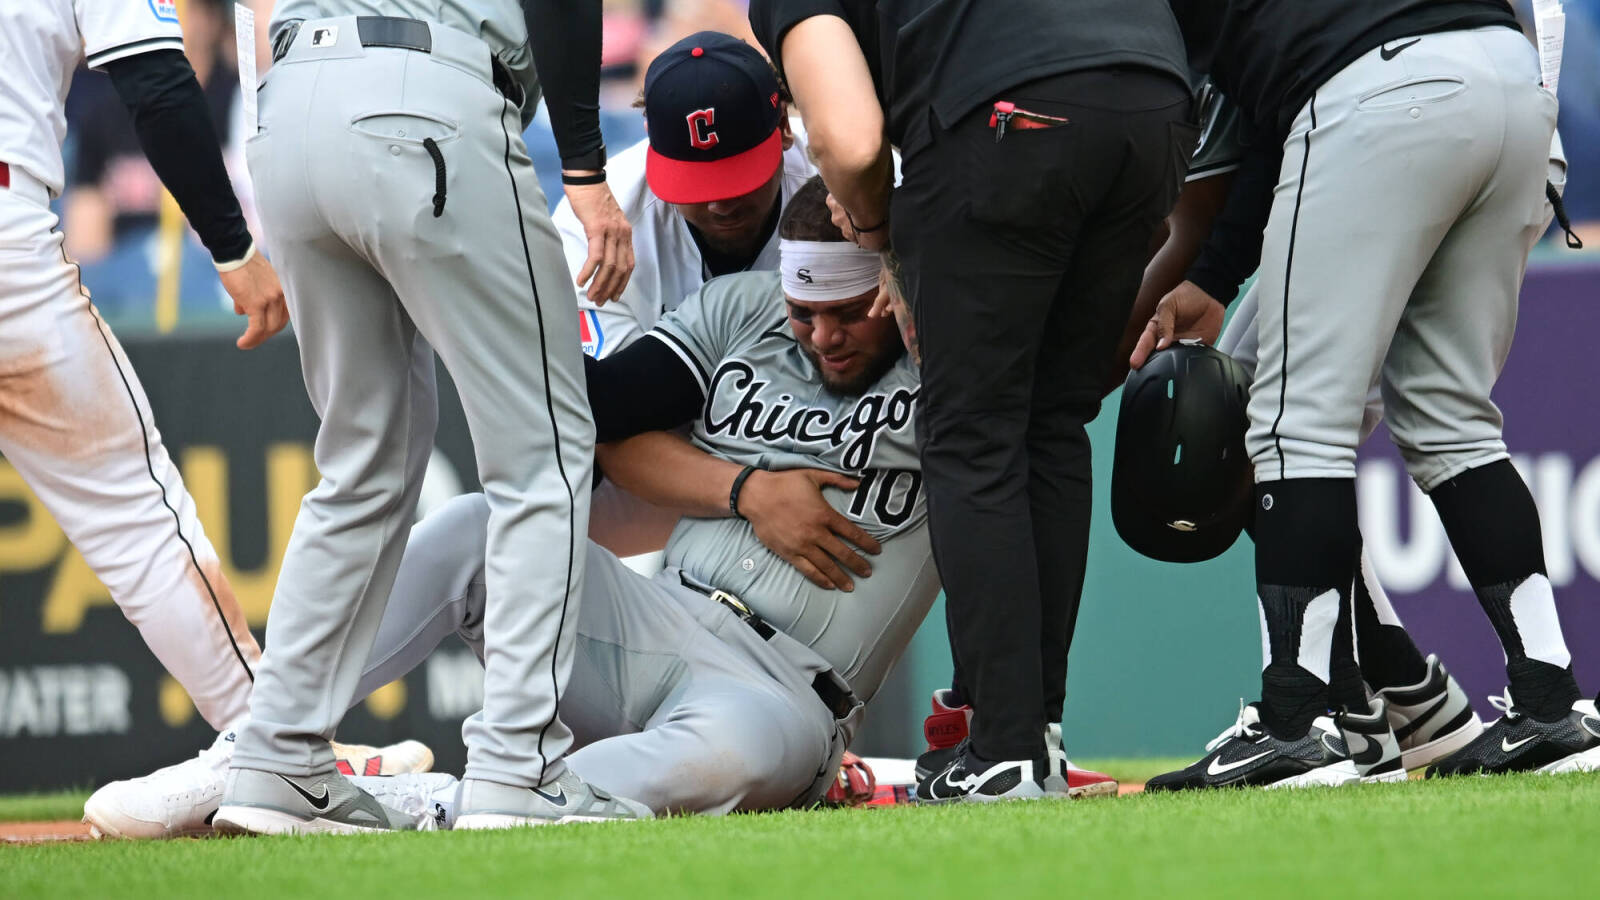 White Sox third baseman to miss significant time with lower-body injury